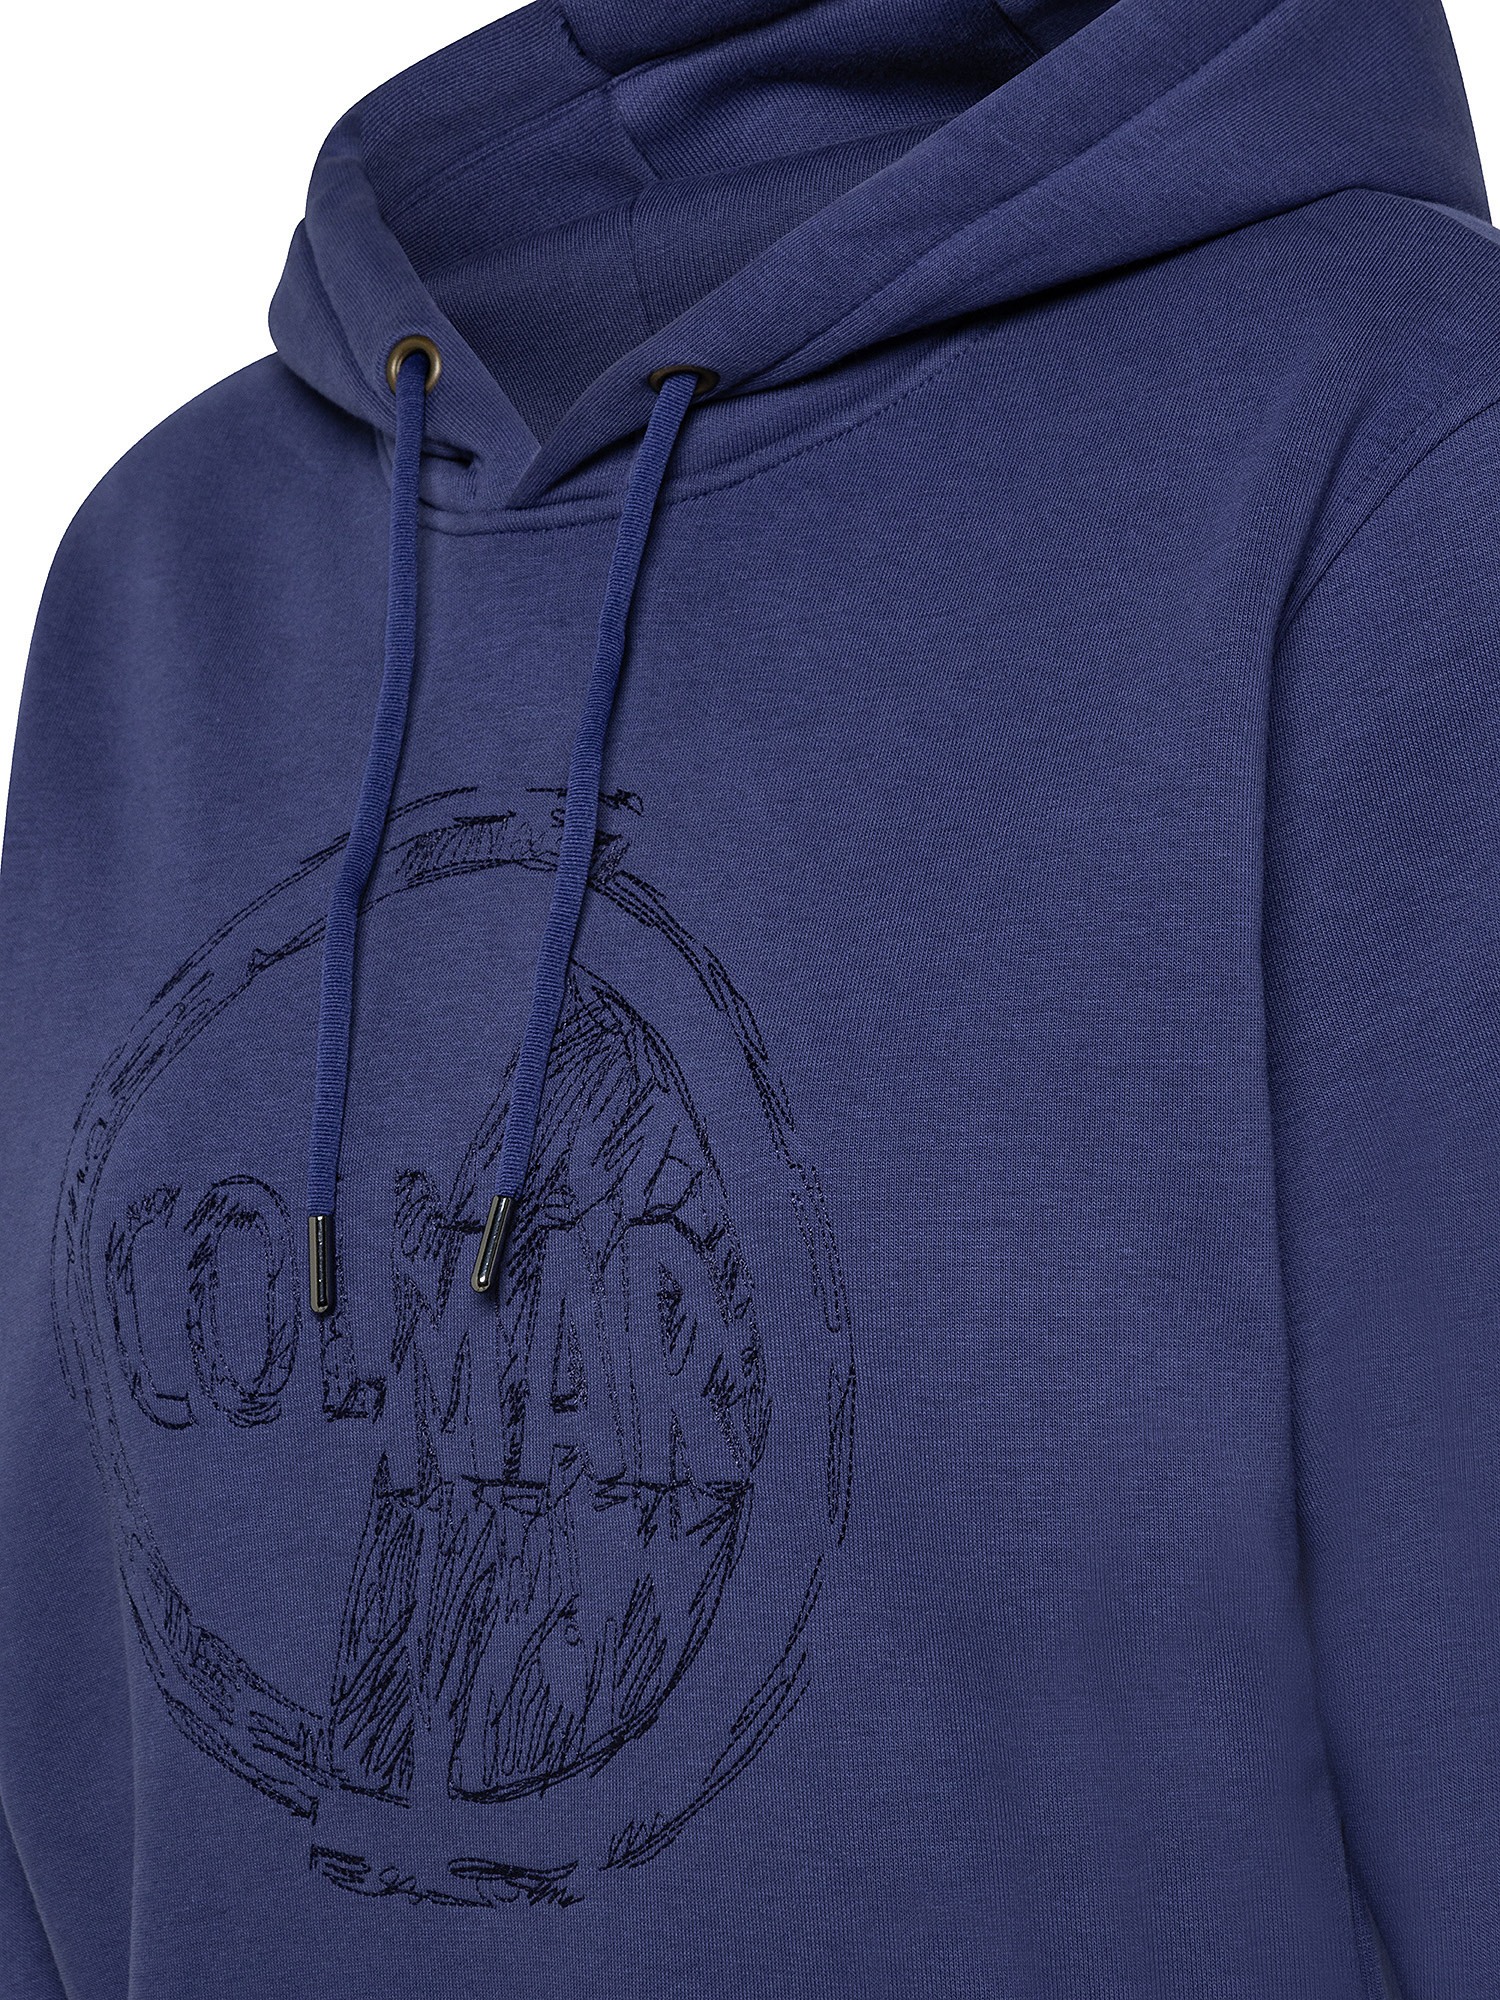 Hoodie sweatshirt with embroidery on chest, Blue, large image number 2